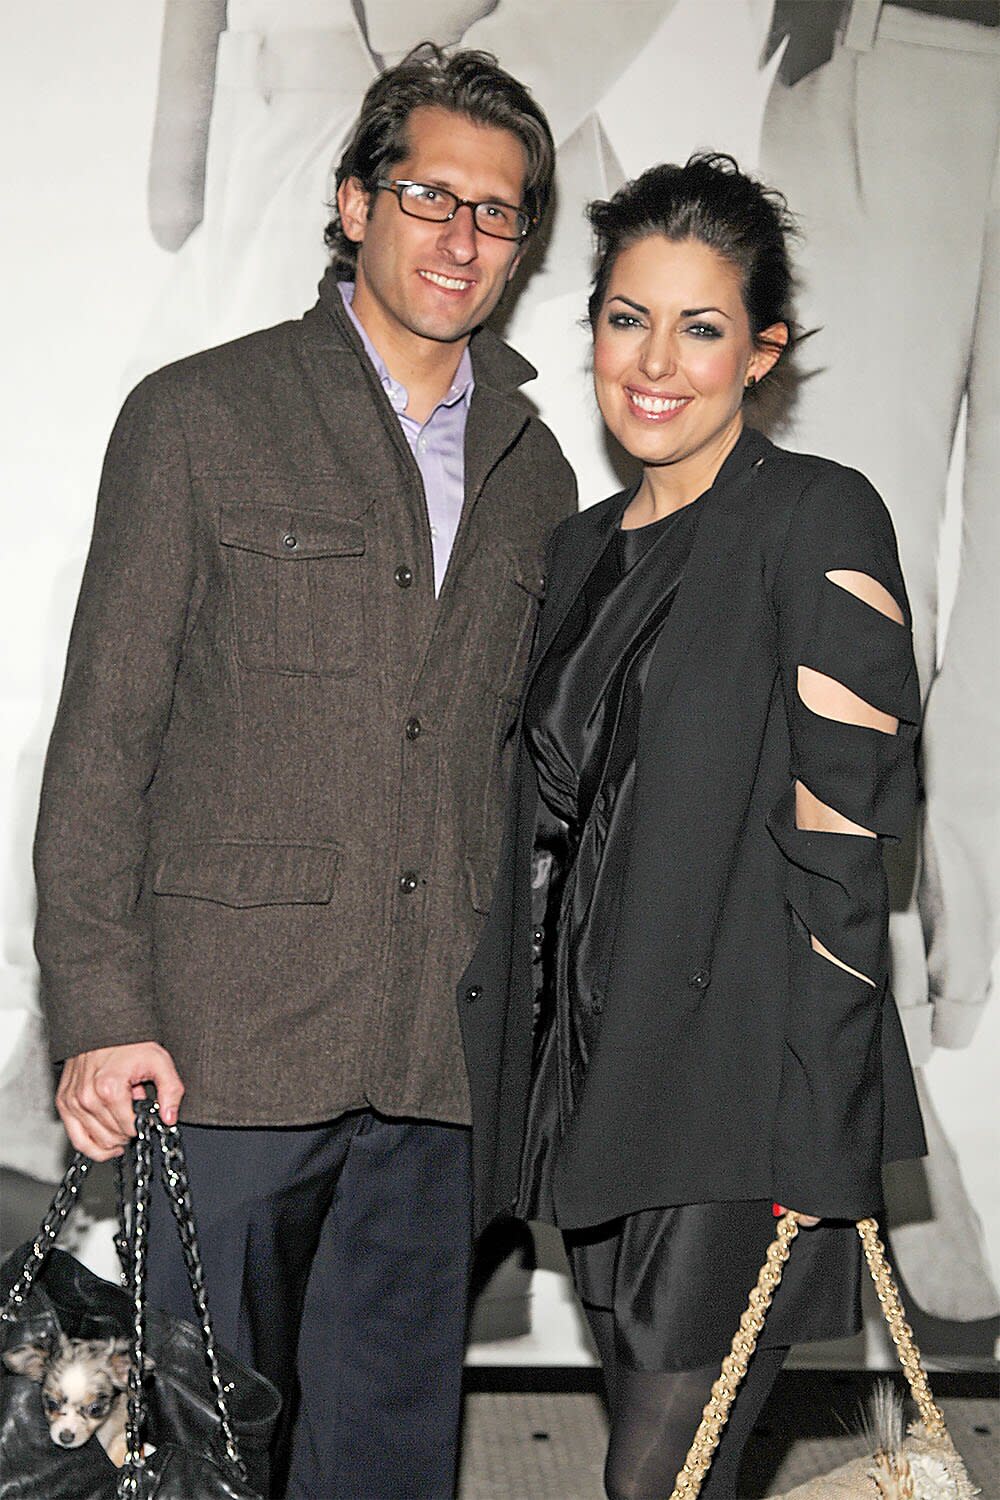 NEW YORK CITY, NY - MARCH 25: Michael Marrion and Bobbi Thomas attend CLUB MONACO Celebrates Photographer BERT STERN at Club Monaco on March 25, 2010 in New York City. (Photo by CLINT SPAULDING/Patrick McMullan via Getty Images)